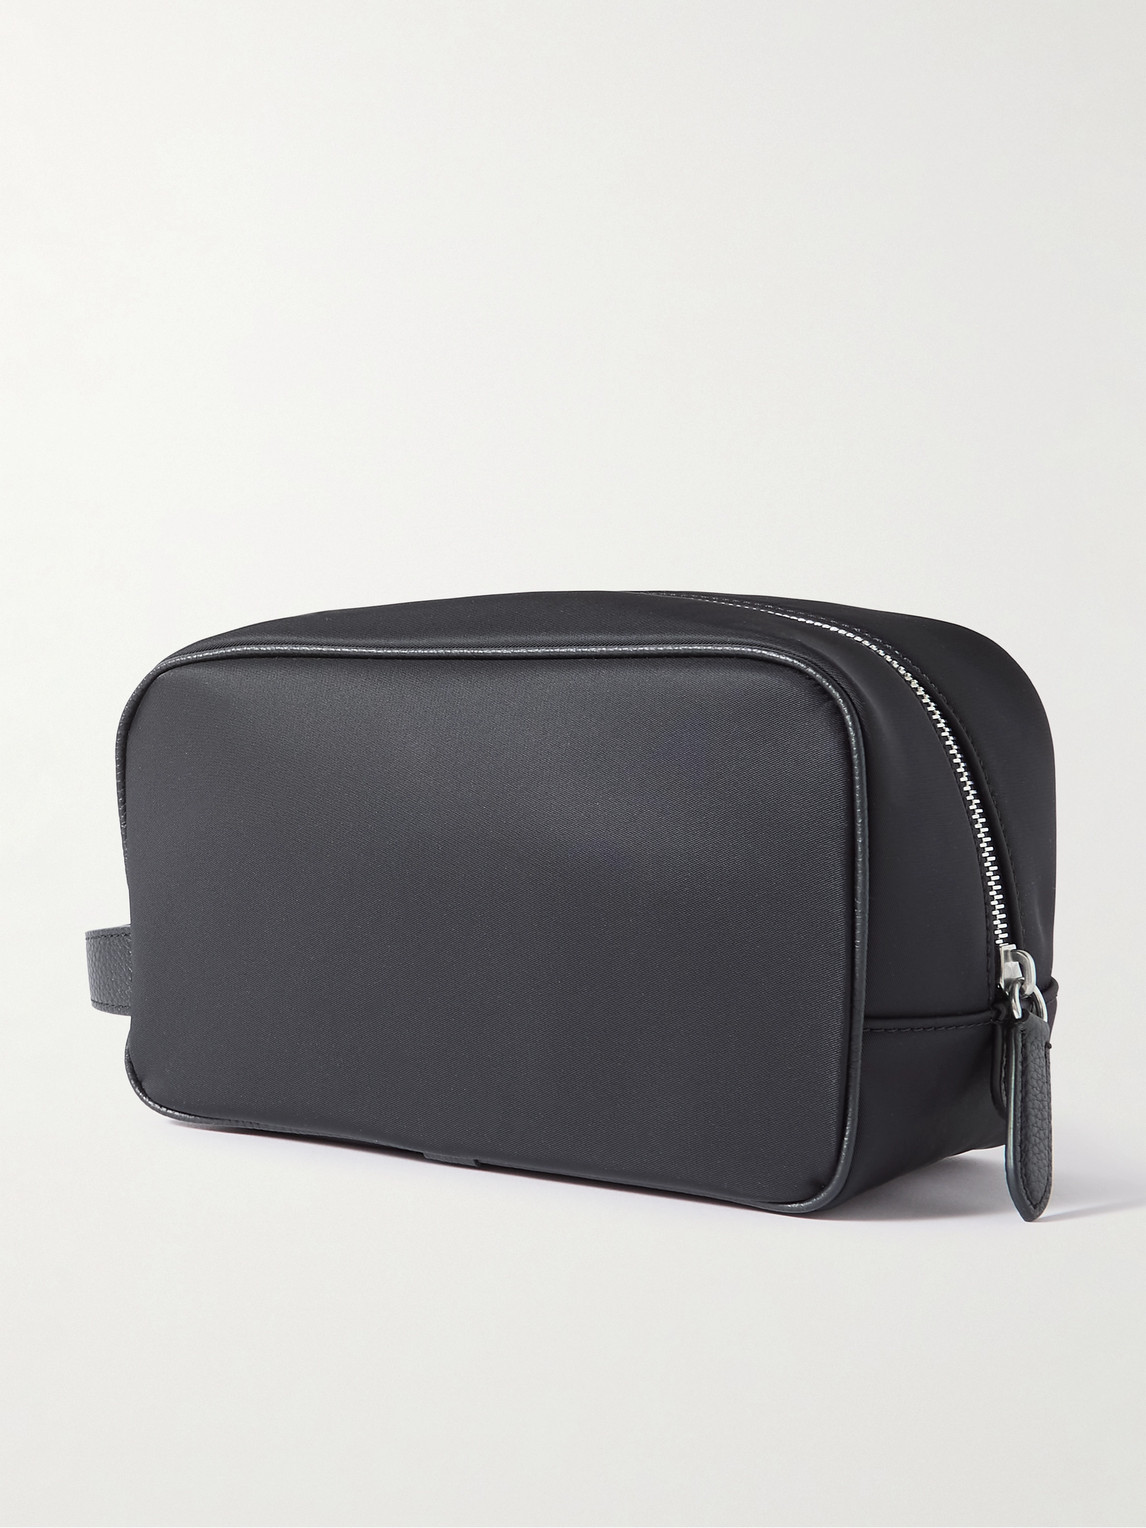 Shop Mulberry Heritage Leather-trimmed Recycled-shell Wash Bag In Black